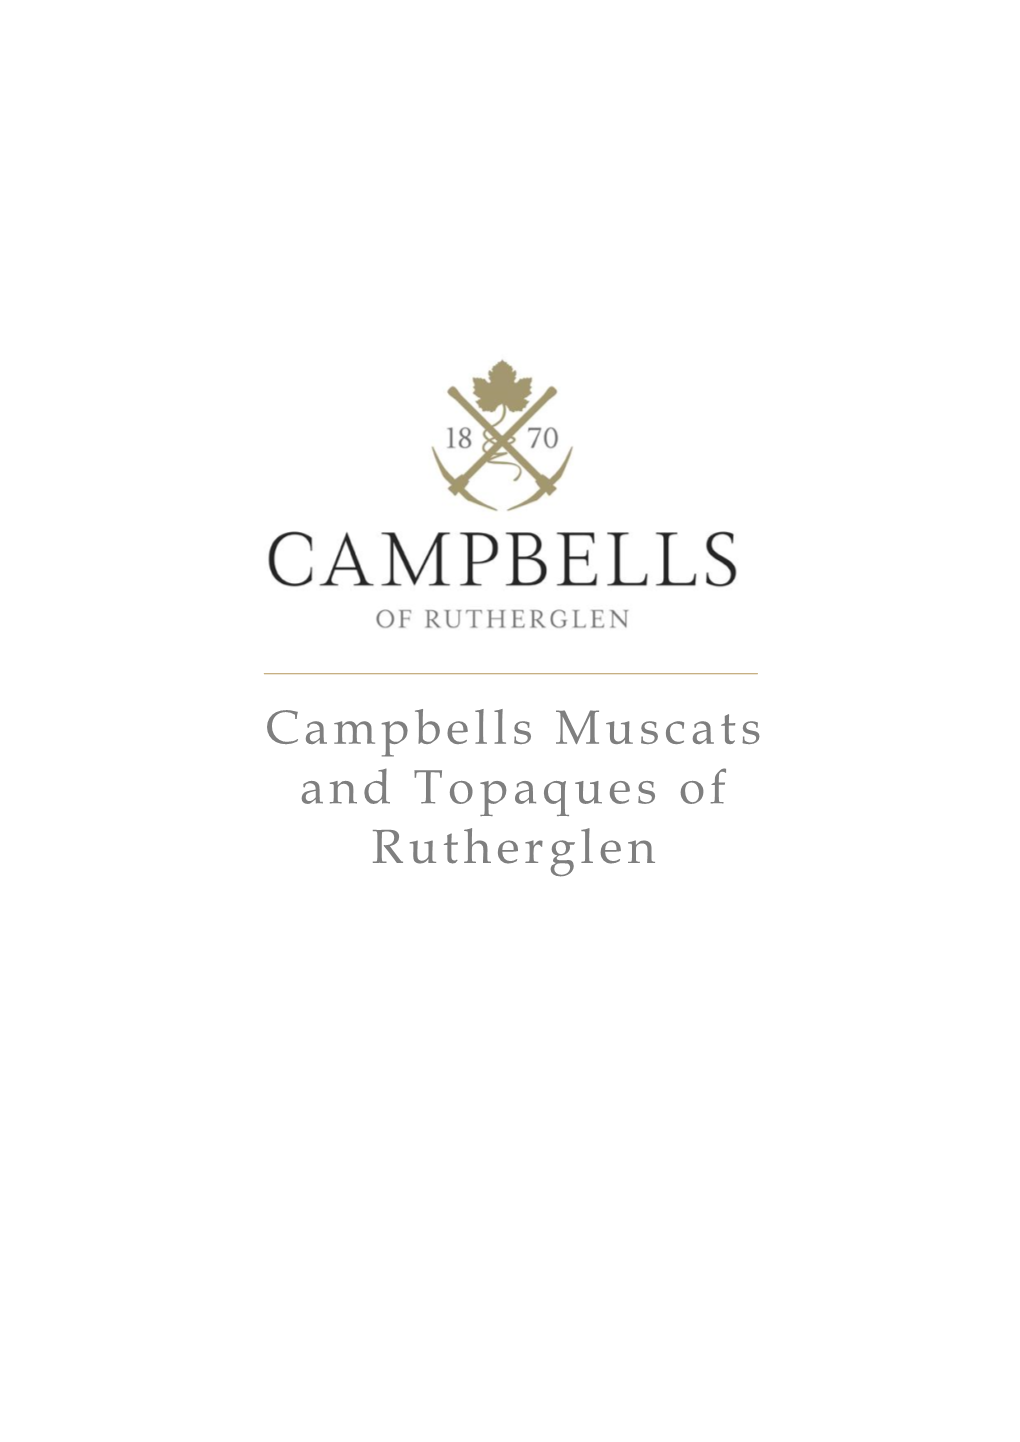 Campbells Muscats and Topaques of Rutherglen